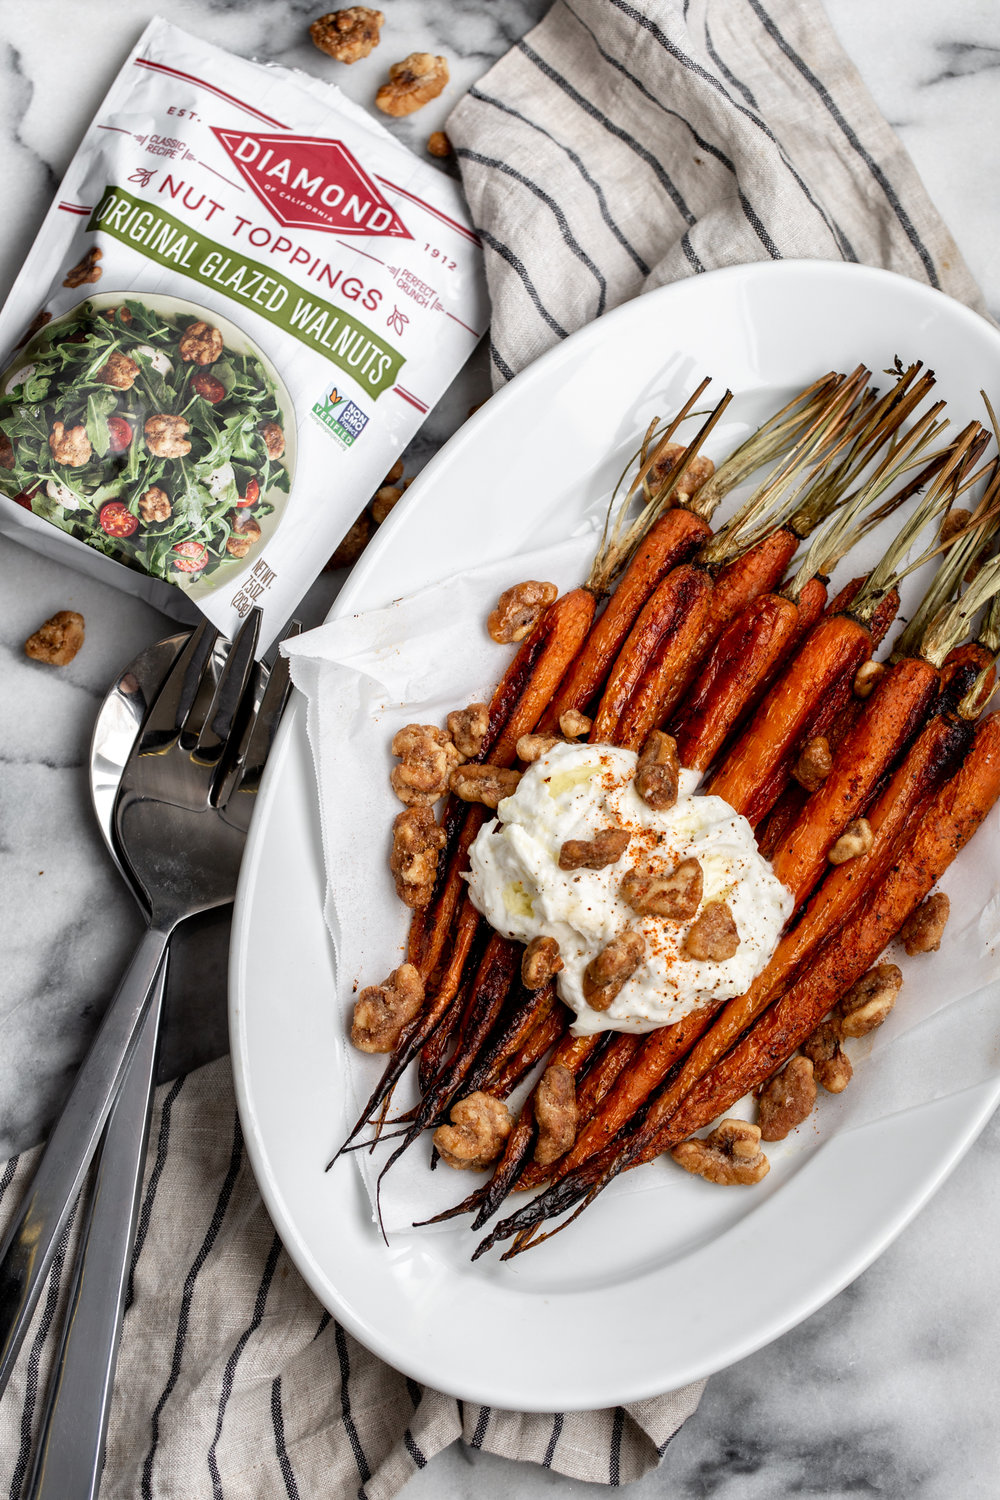 The roasted carrots are seasoned simply with salt, pepper and a touch of cayenne for a bit of spice then topped with creamy burrata cheese and some crispy, glazed walnuts